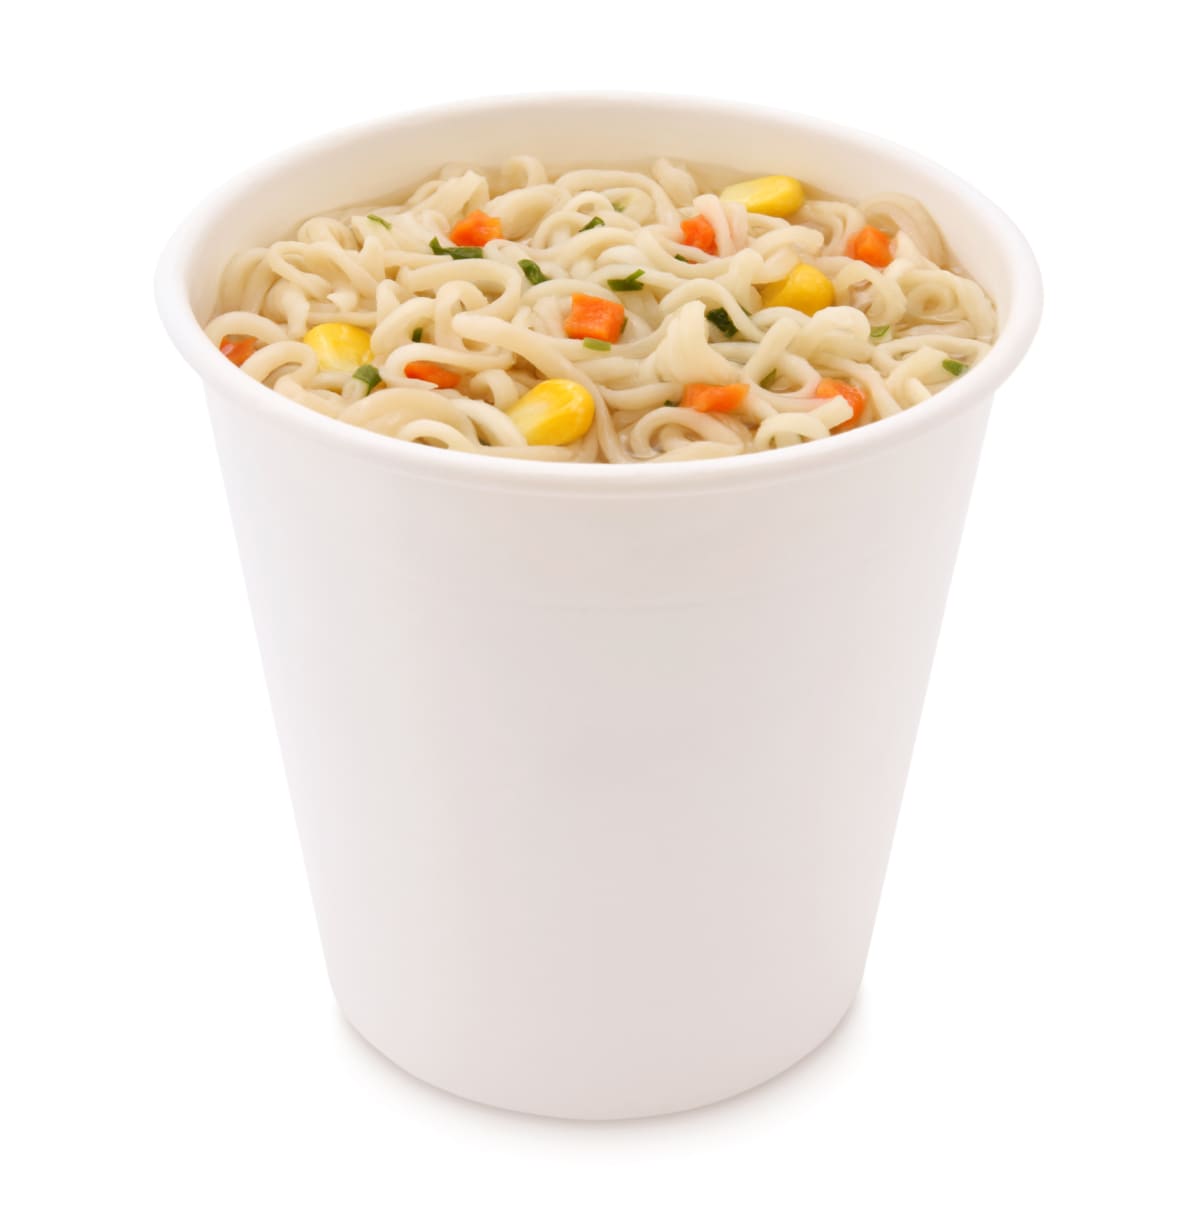 Instant Noddles Cup isolated on white (excluding the shadow)